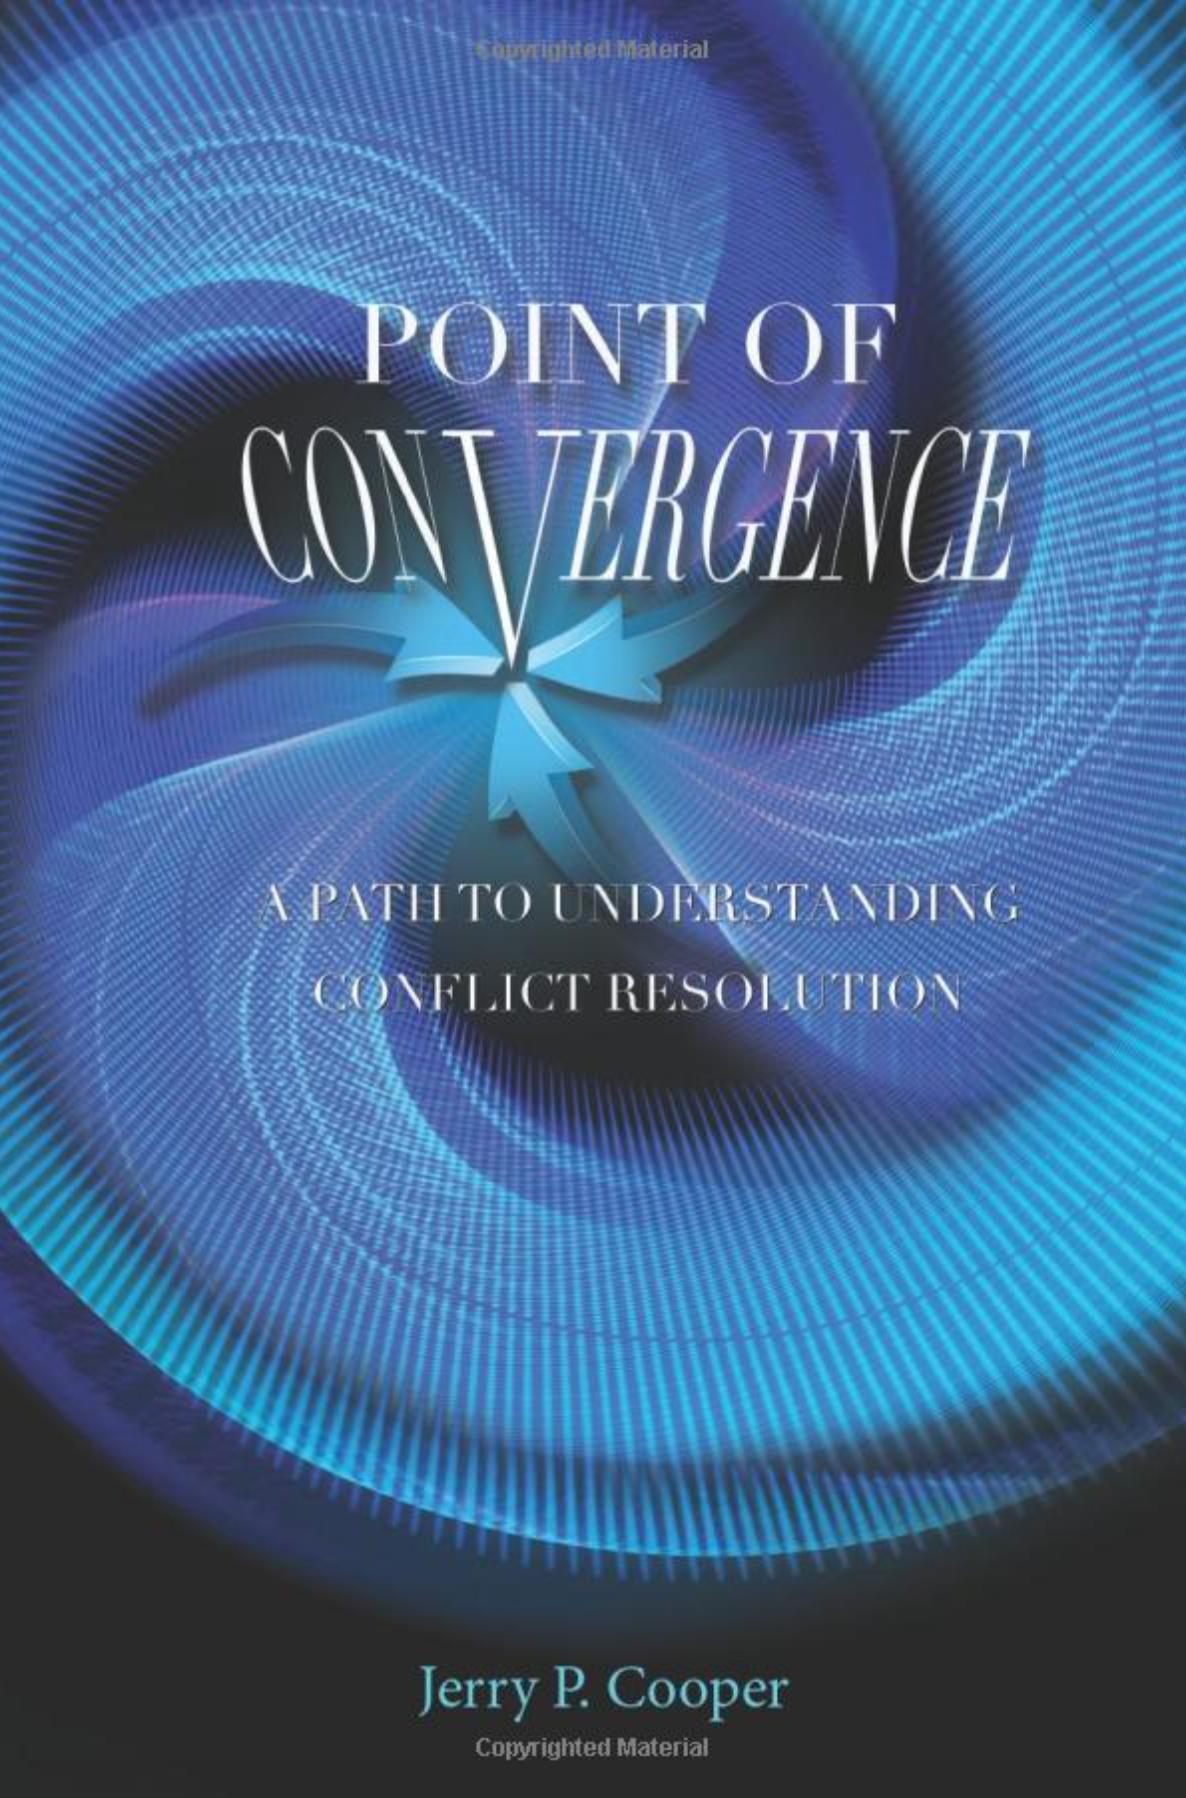 Point of Convergence by Jerry P Cooper